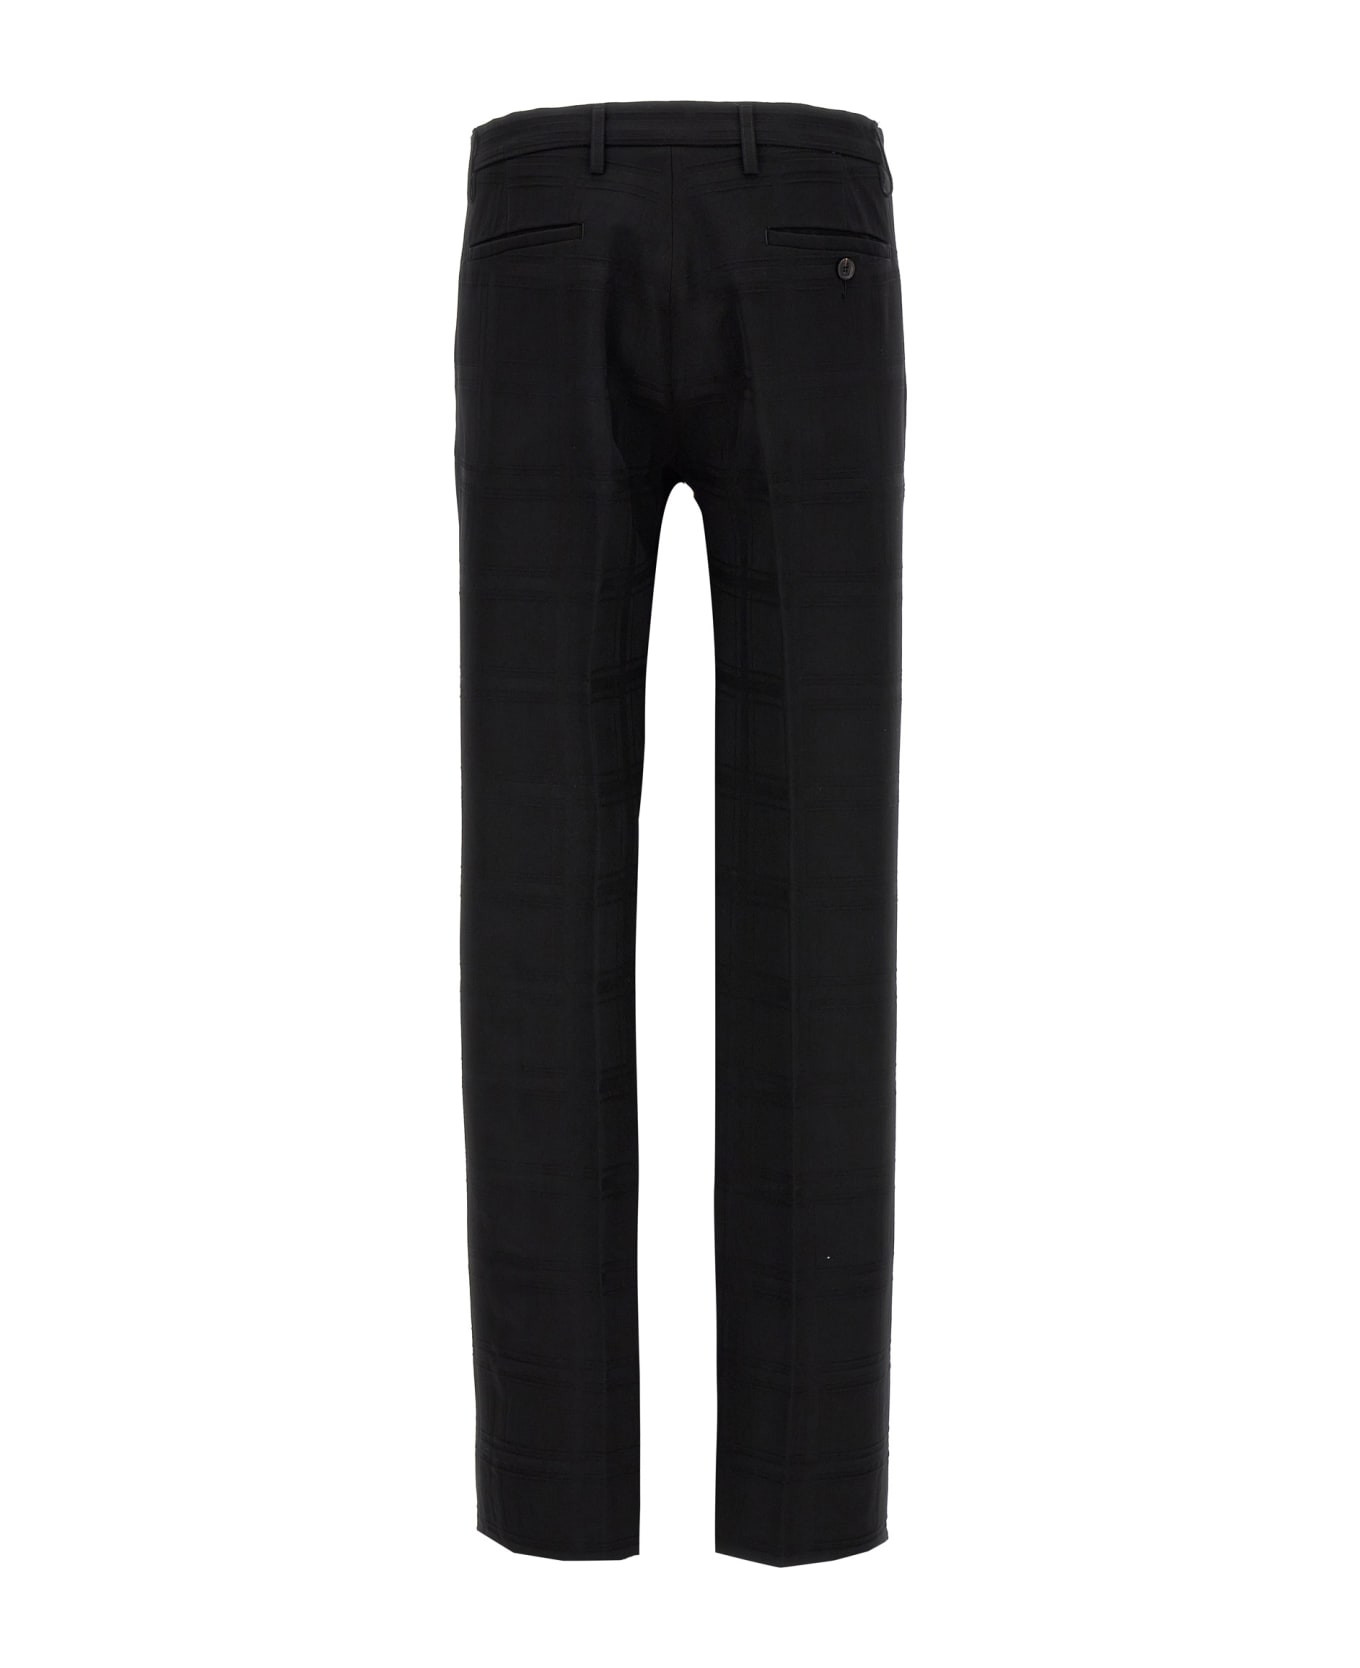 Etro Check Wool Trousers - Black  